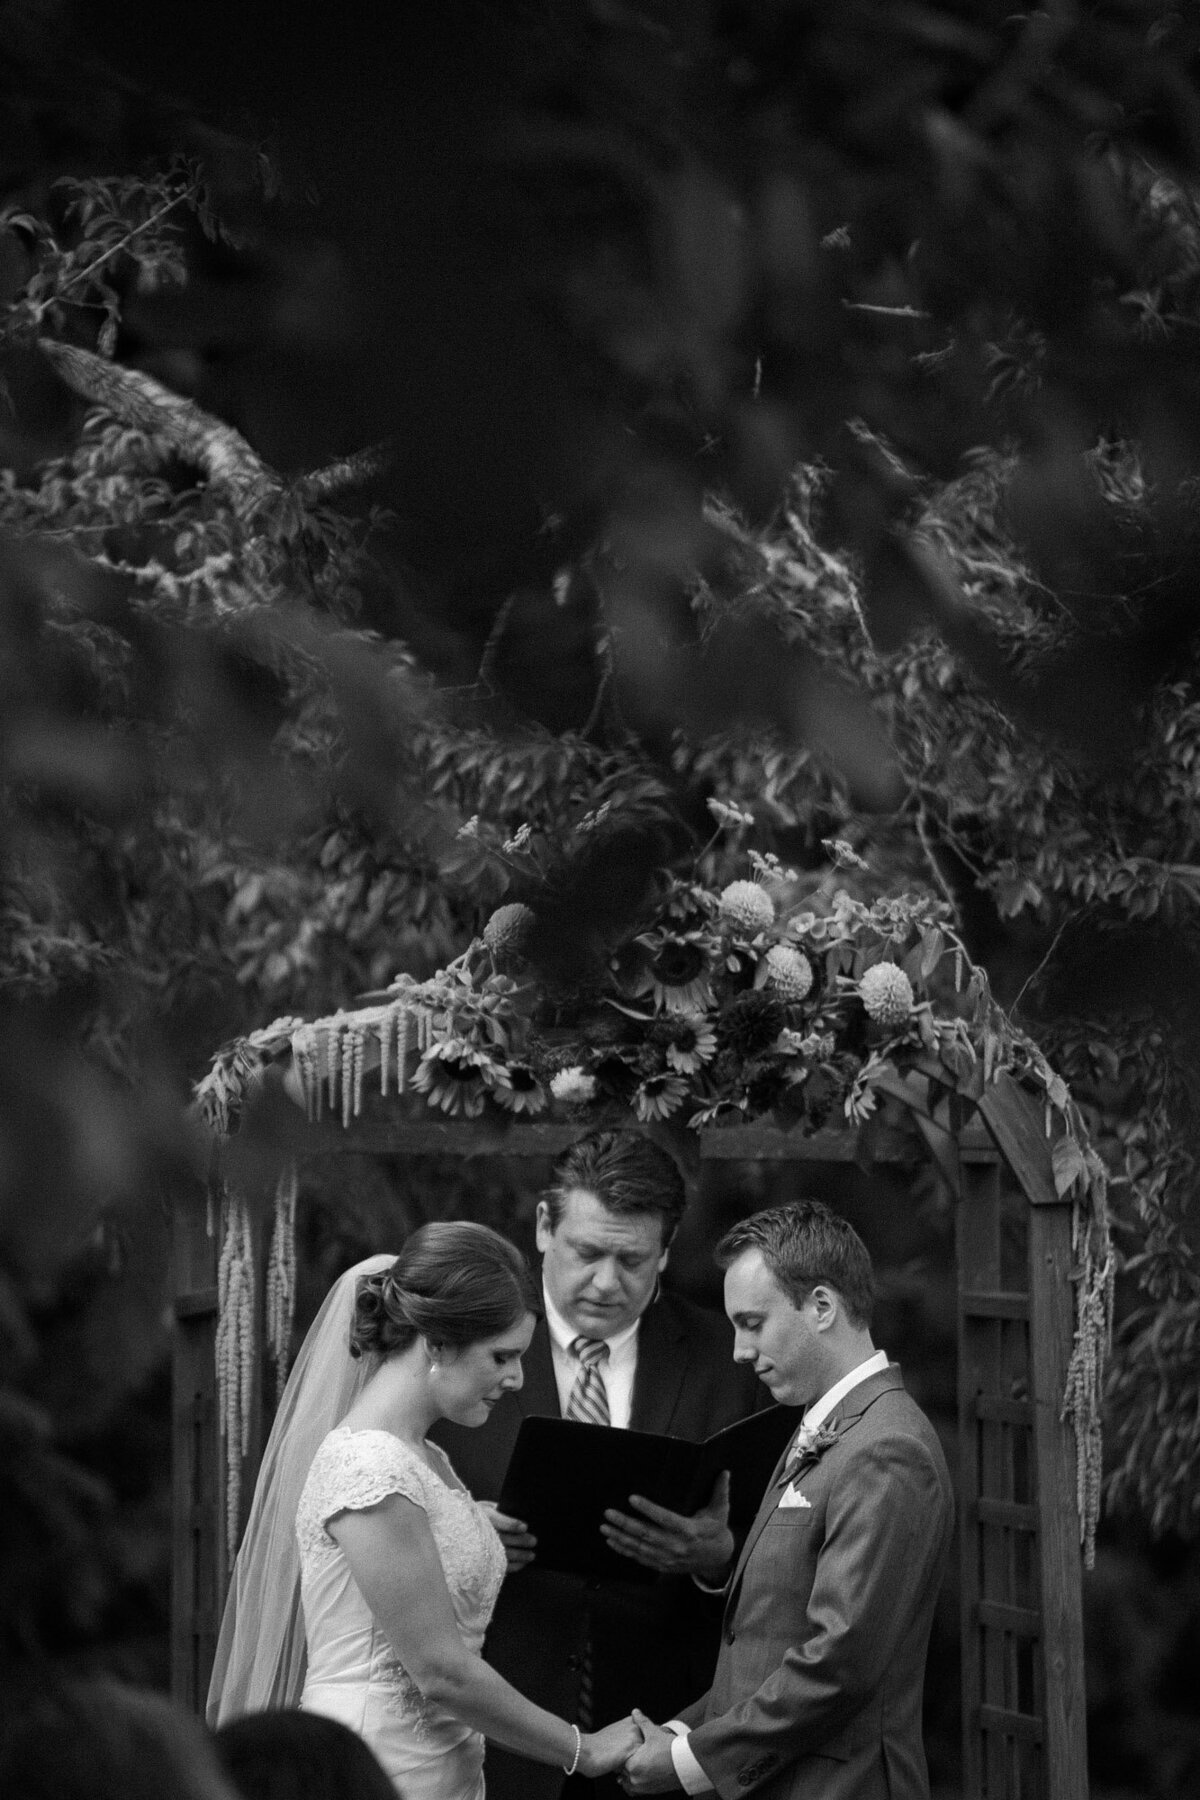 Bride-and-groom-exchange-vows-at-emotional-wedding-ceremony-in-forest-in-Woodinville-WA-photo-by-Joanna-Monger-Photography